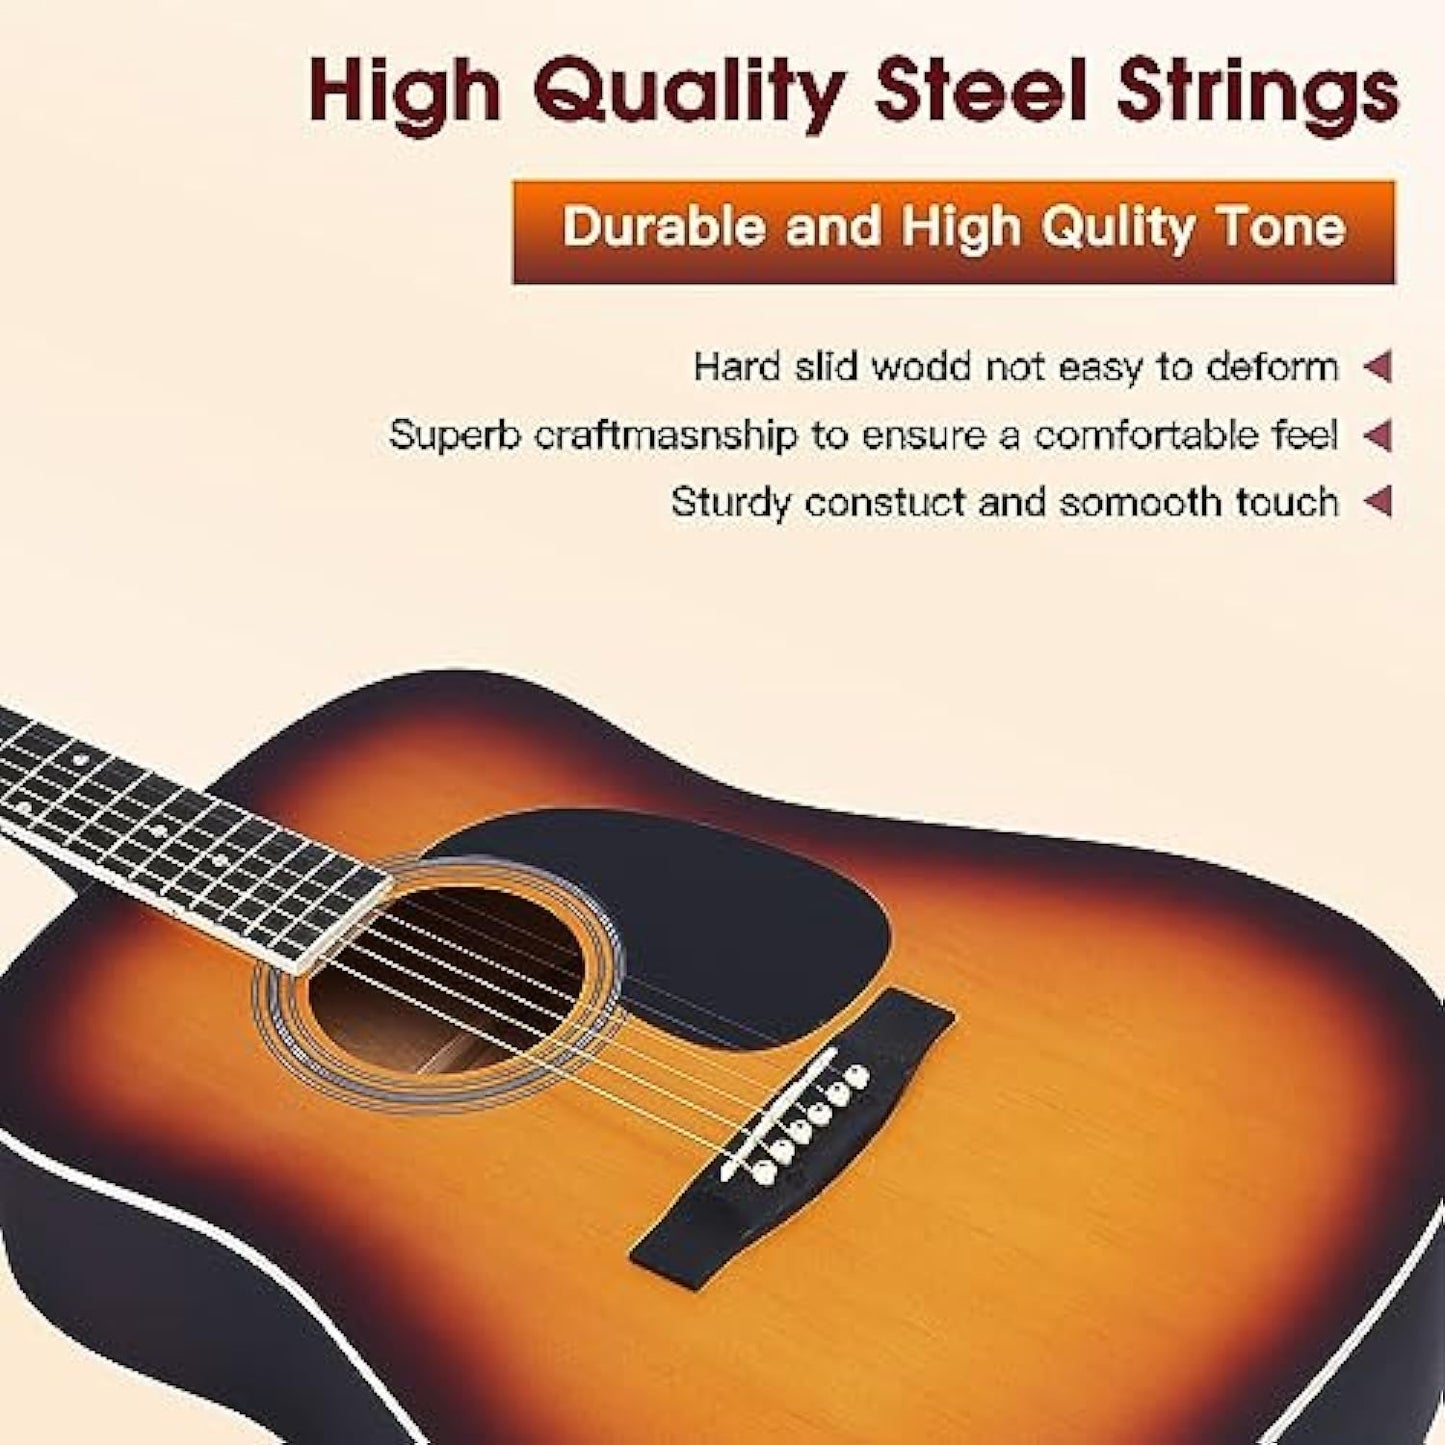 ADM Dreadnought Acoustic Guitar Kit with Free Online Lesson for Beginner Adult Teen Full Size Acustica Guitarra Starter Bundle Set